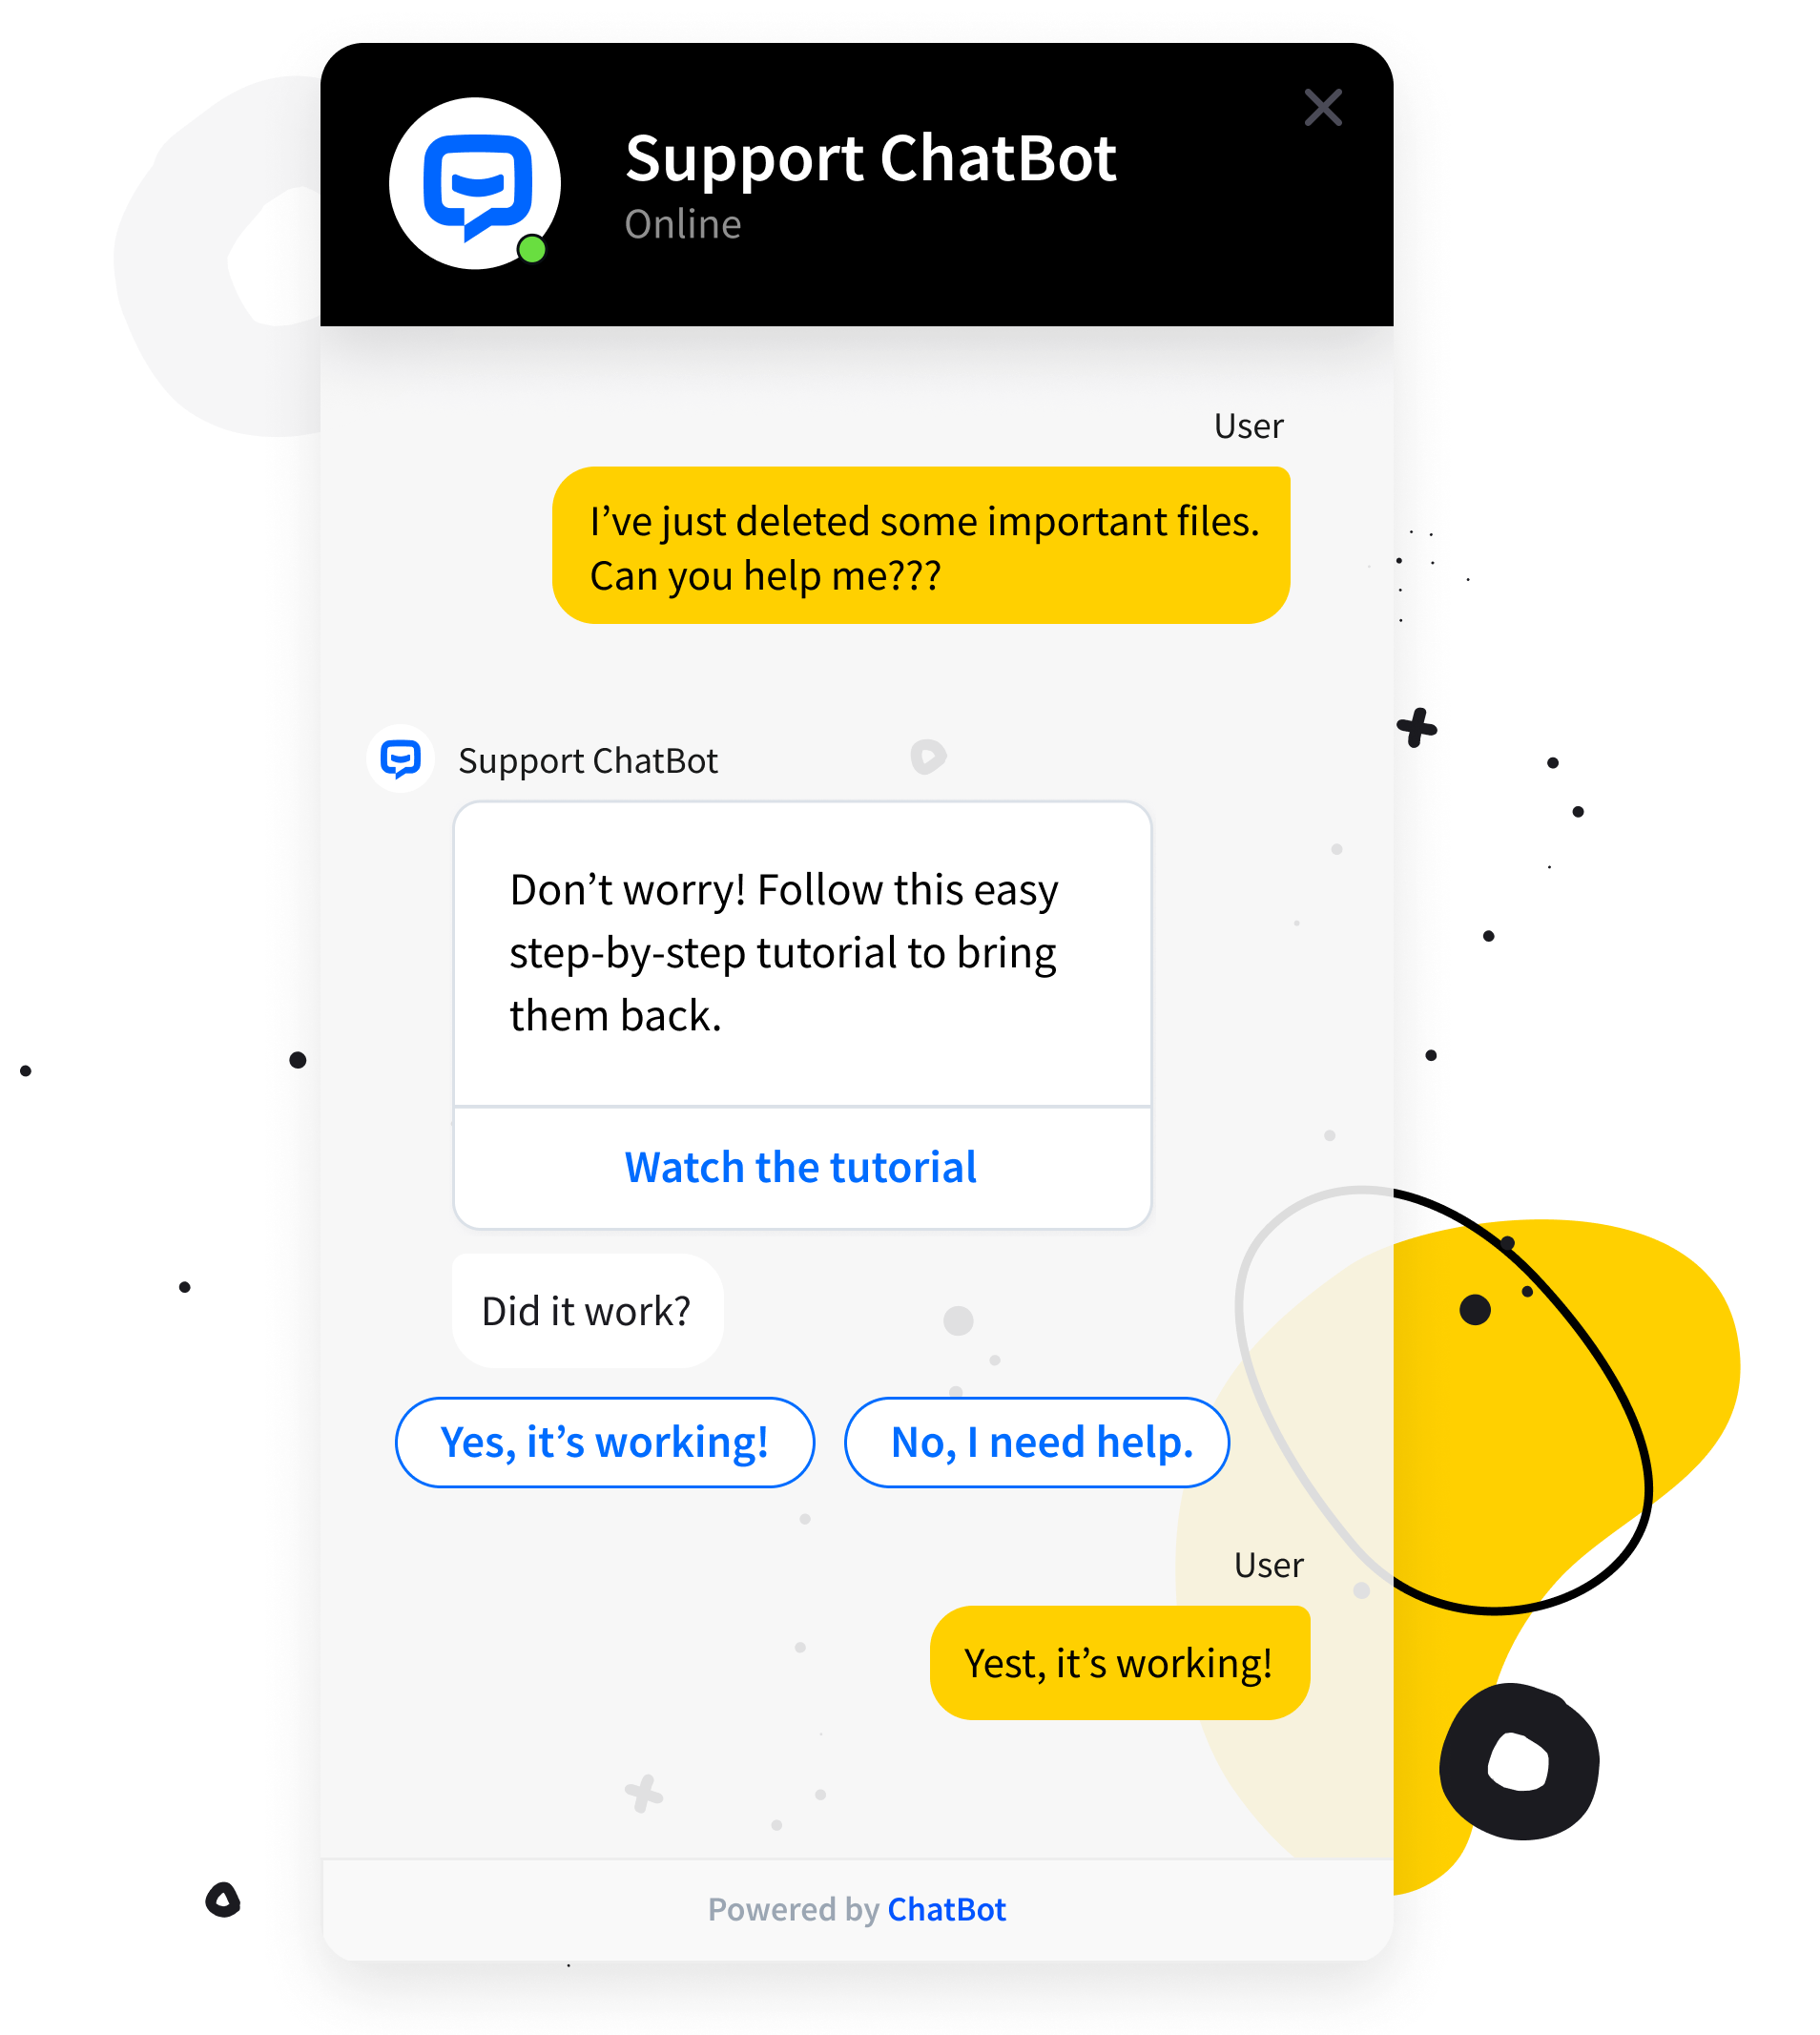 customer support ai chatbot service for websites